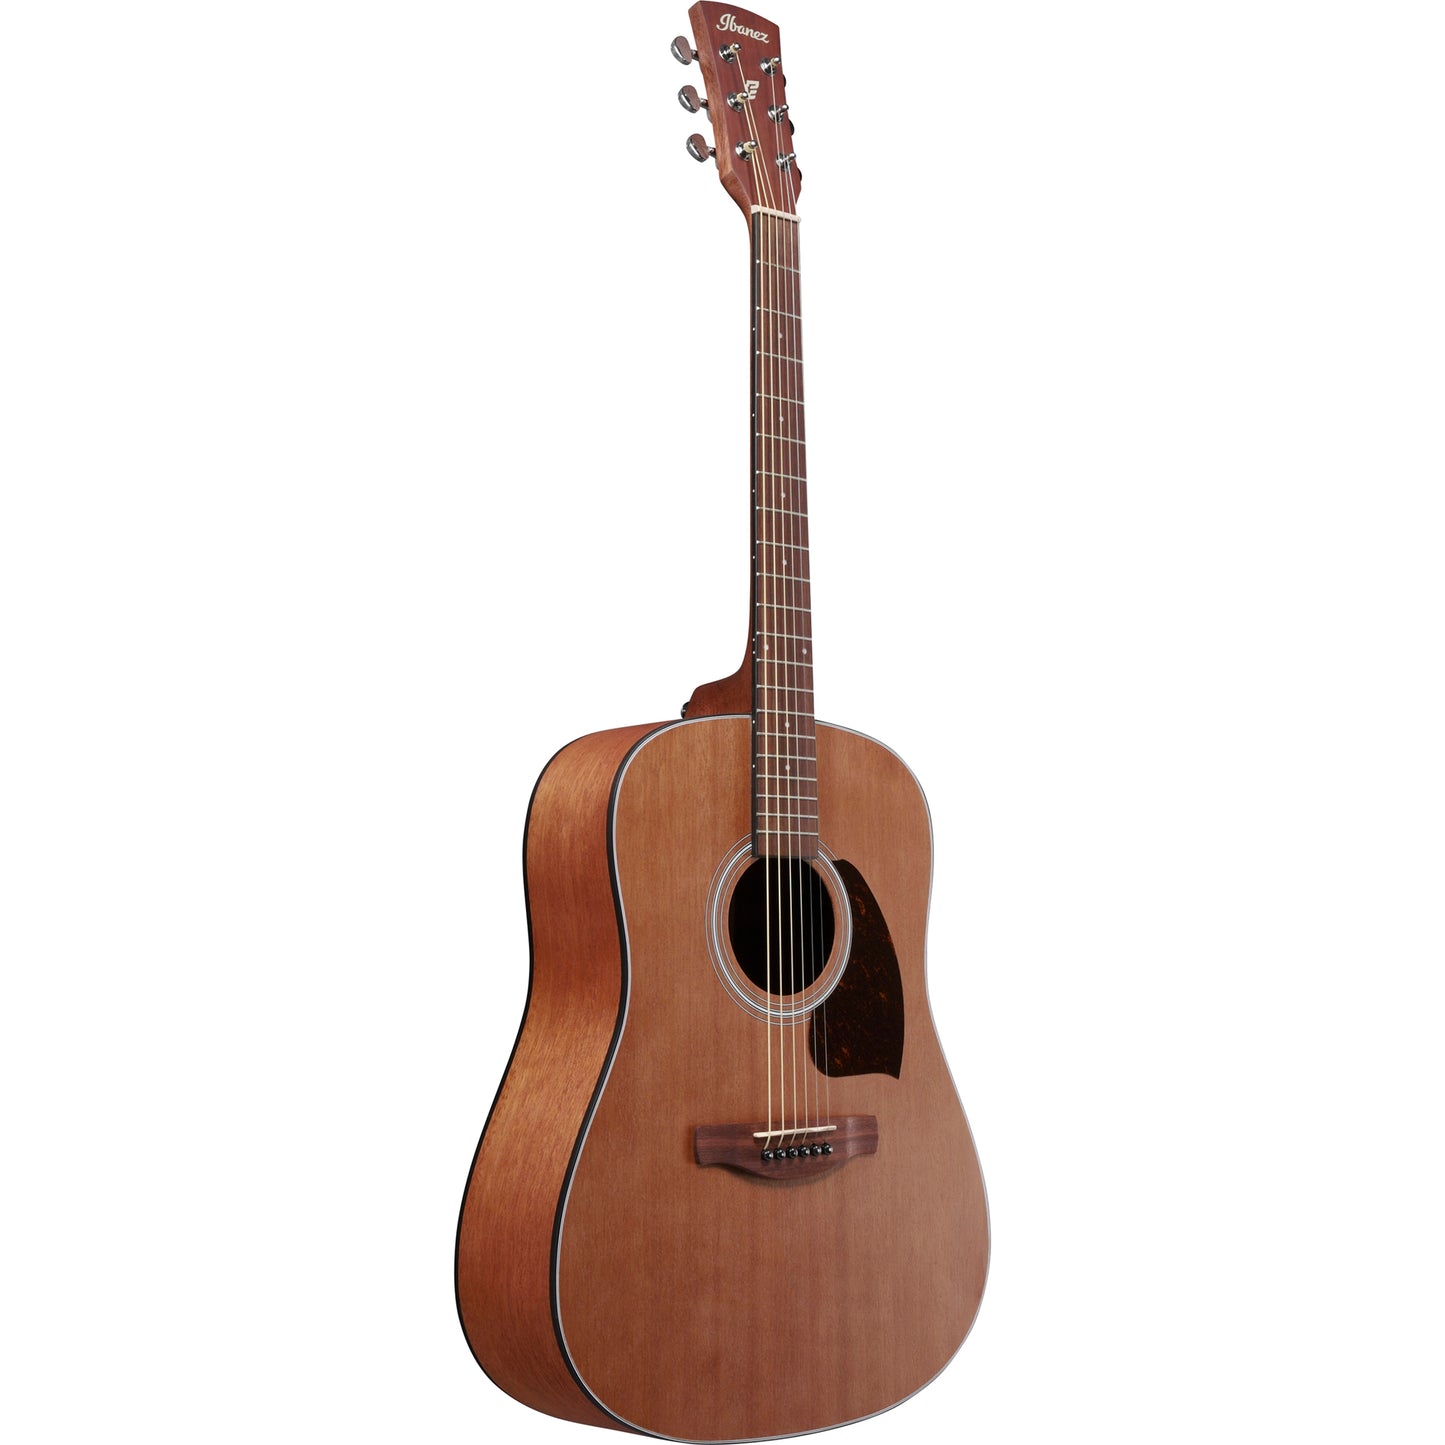 Ibanez PF54 6 String Acoustic Guitar - Open Pore Natural